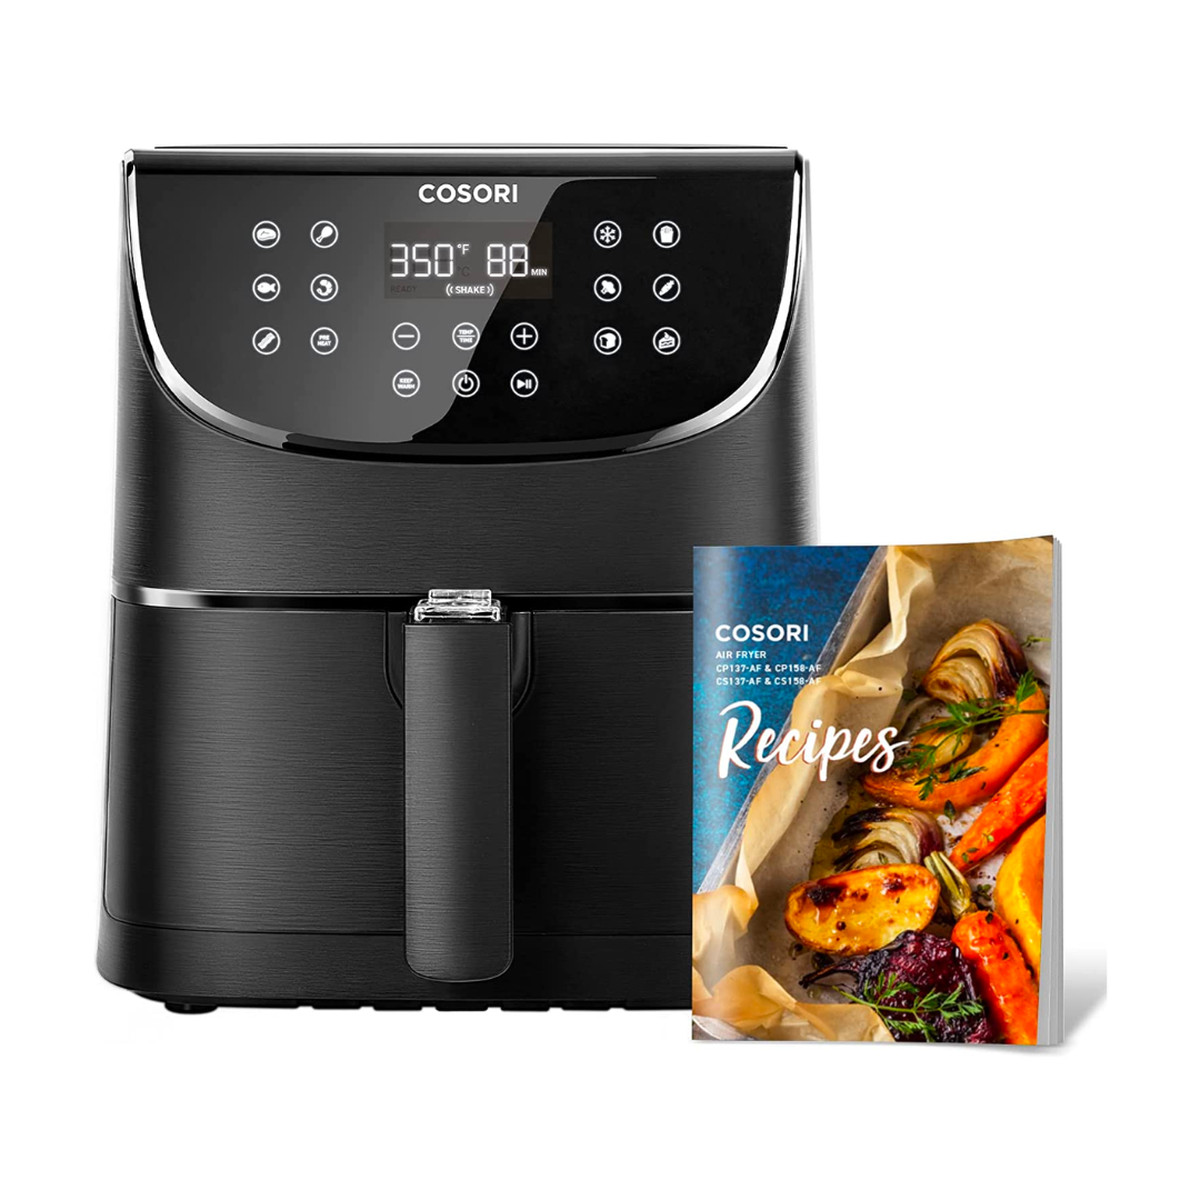 COSORI black extra-large air fryer with recipe book